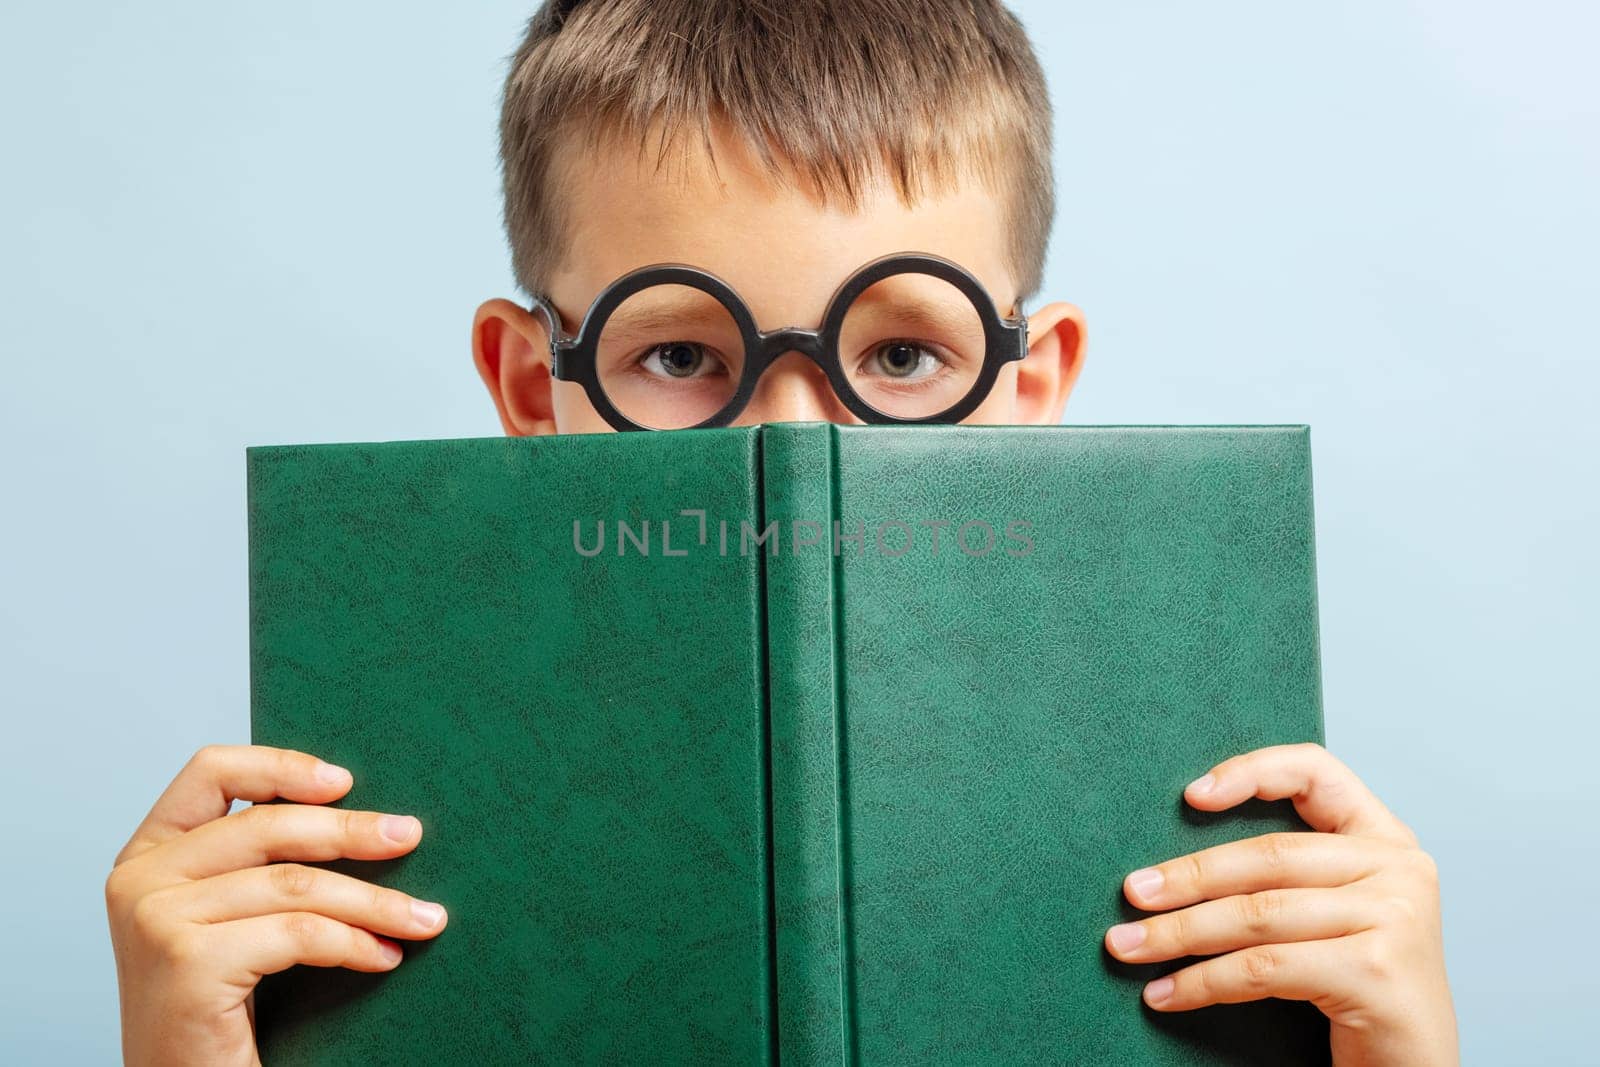 Little schoolboy in eyeglasses looks out from behind the book on blue background. Education and school concept.